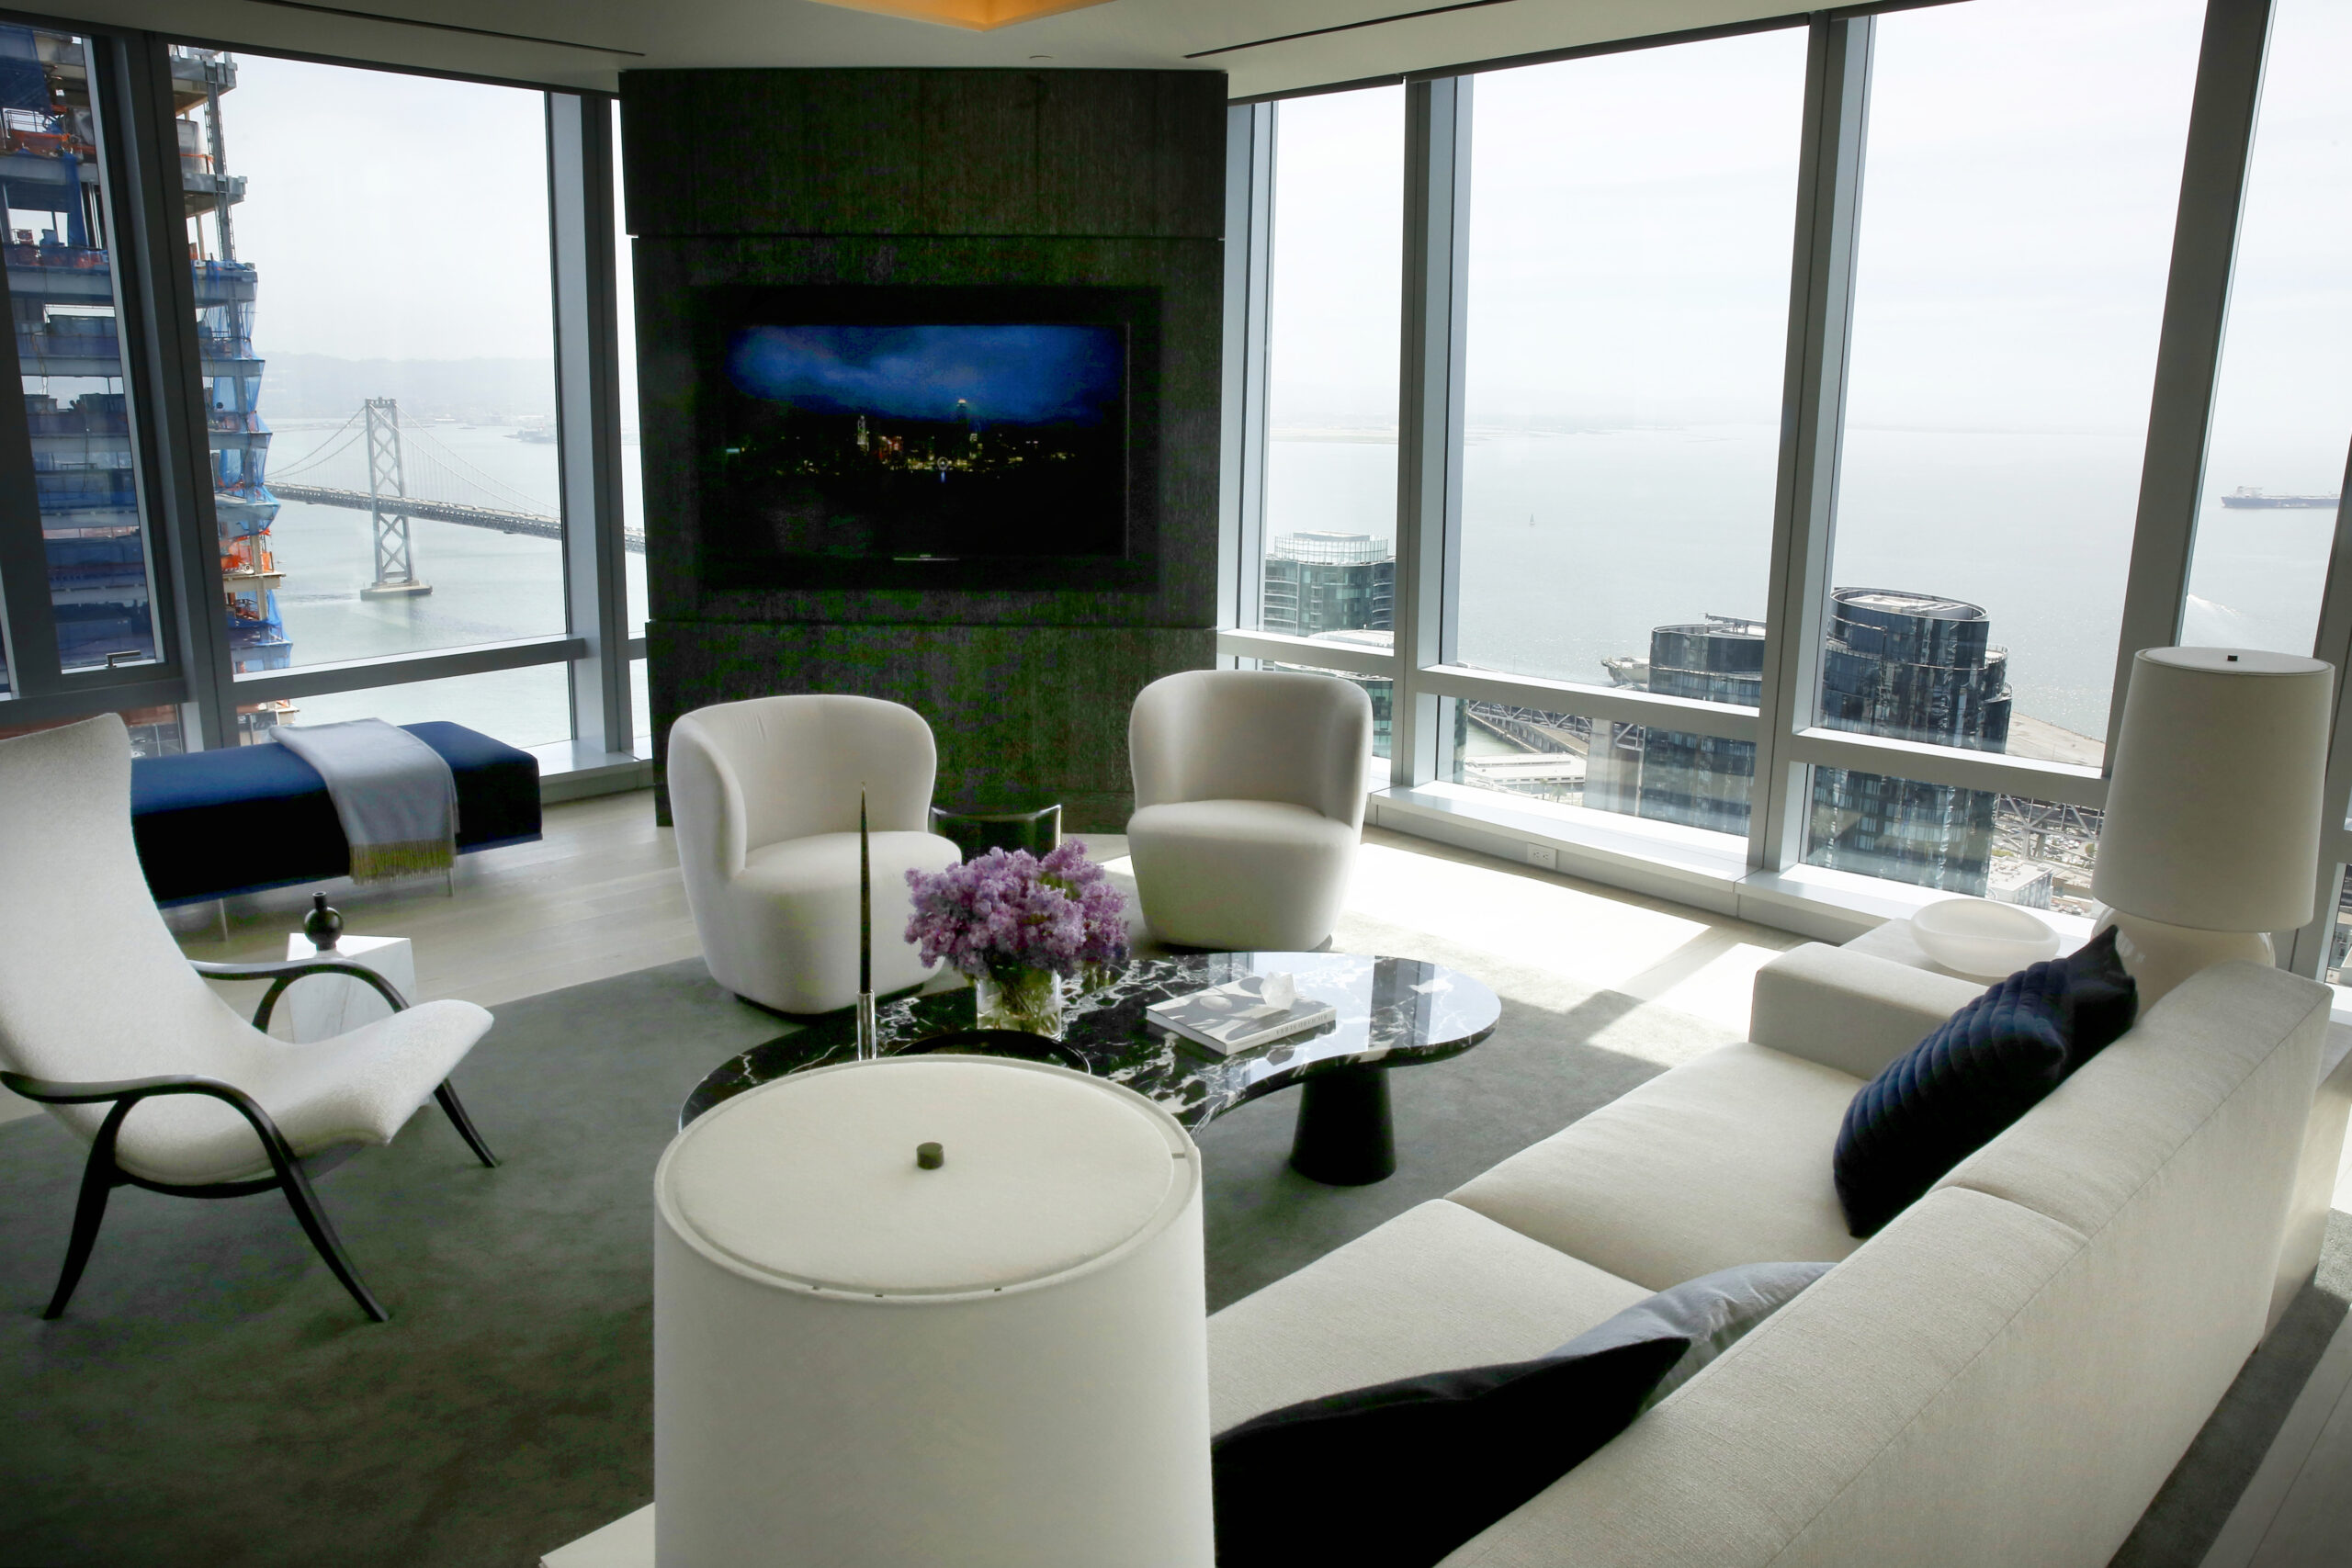 SF’s downtown condos are piling up and pricing down as housing market cools